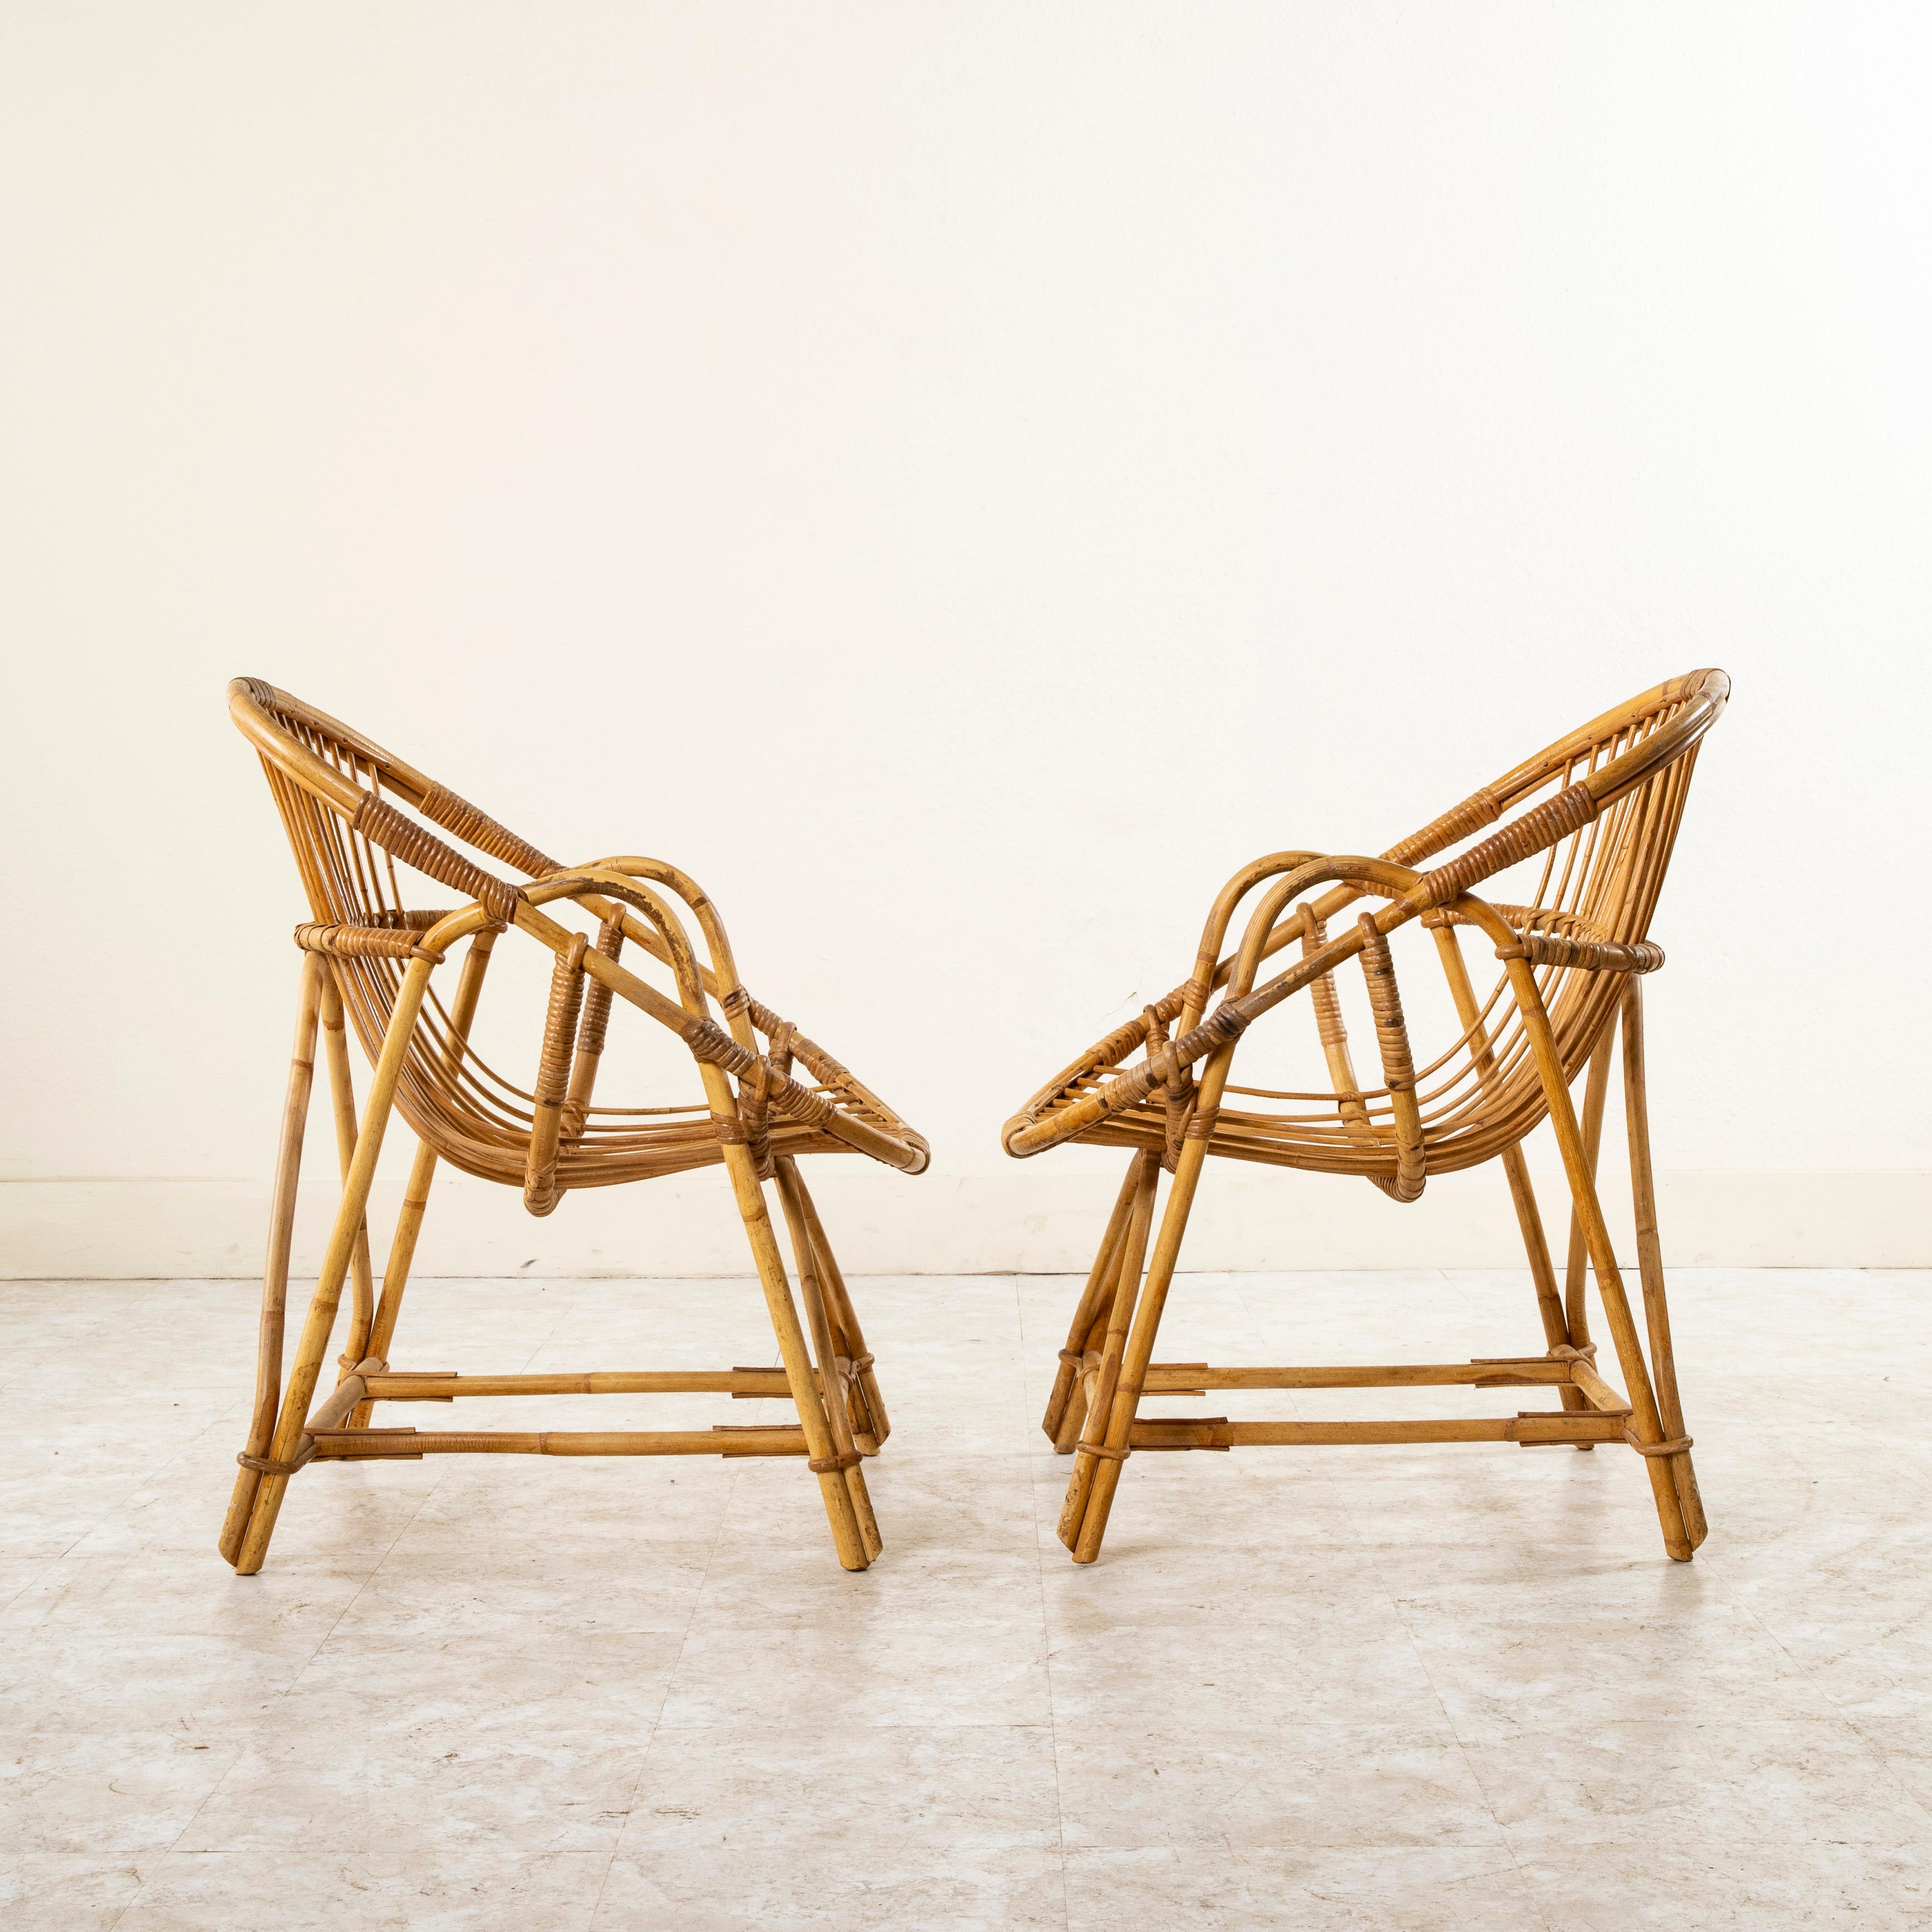 Pair of Mid-20th Century French Rattan Armchairs or Garden Chairs For Sale 2